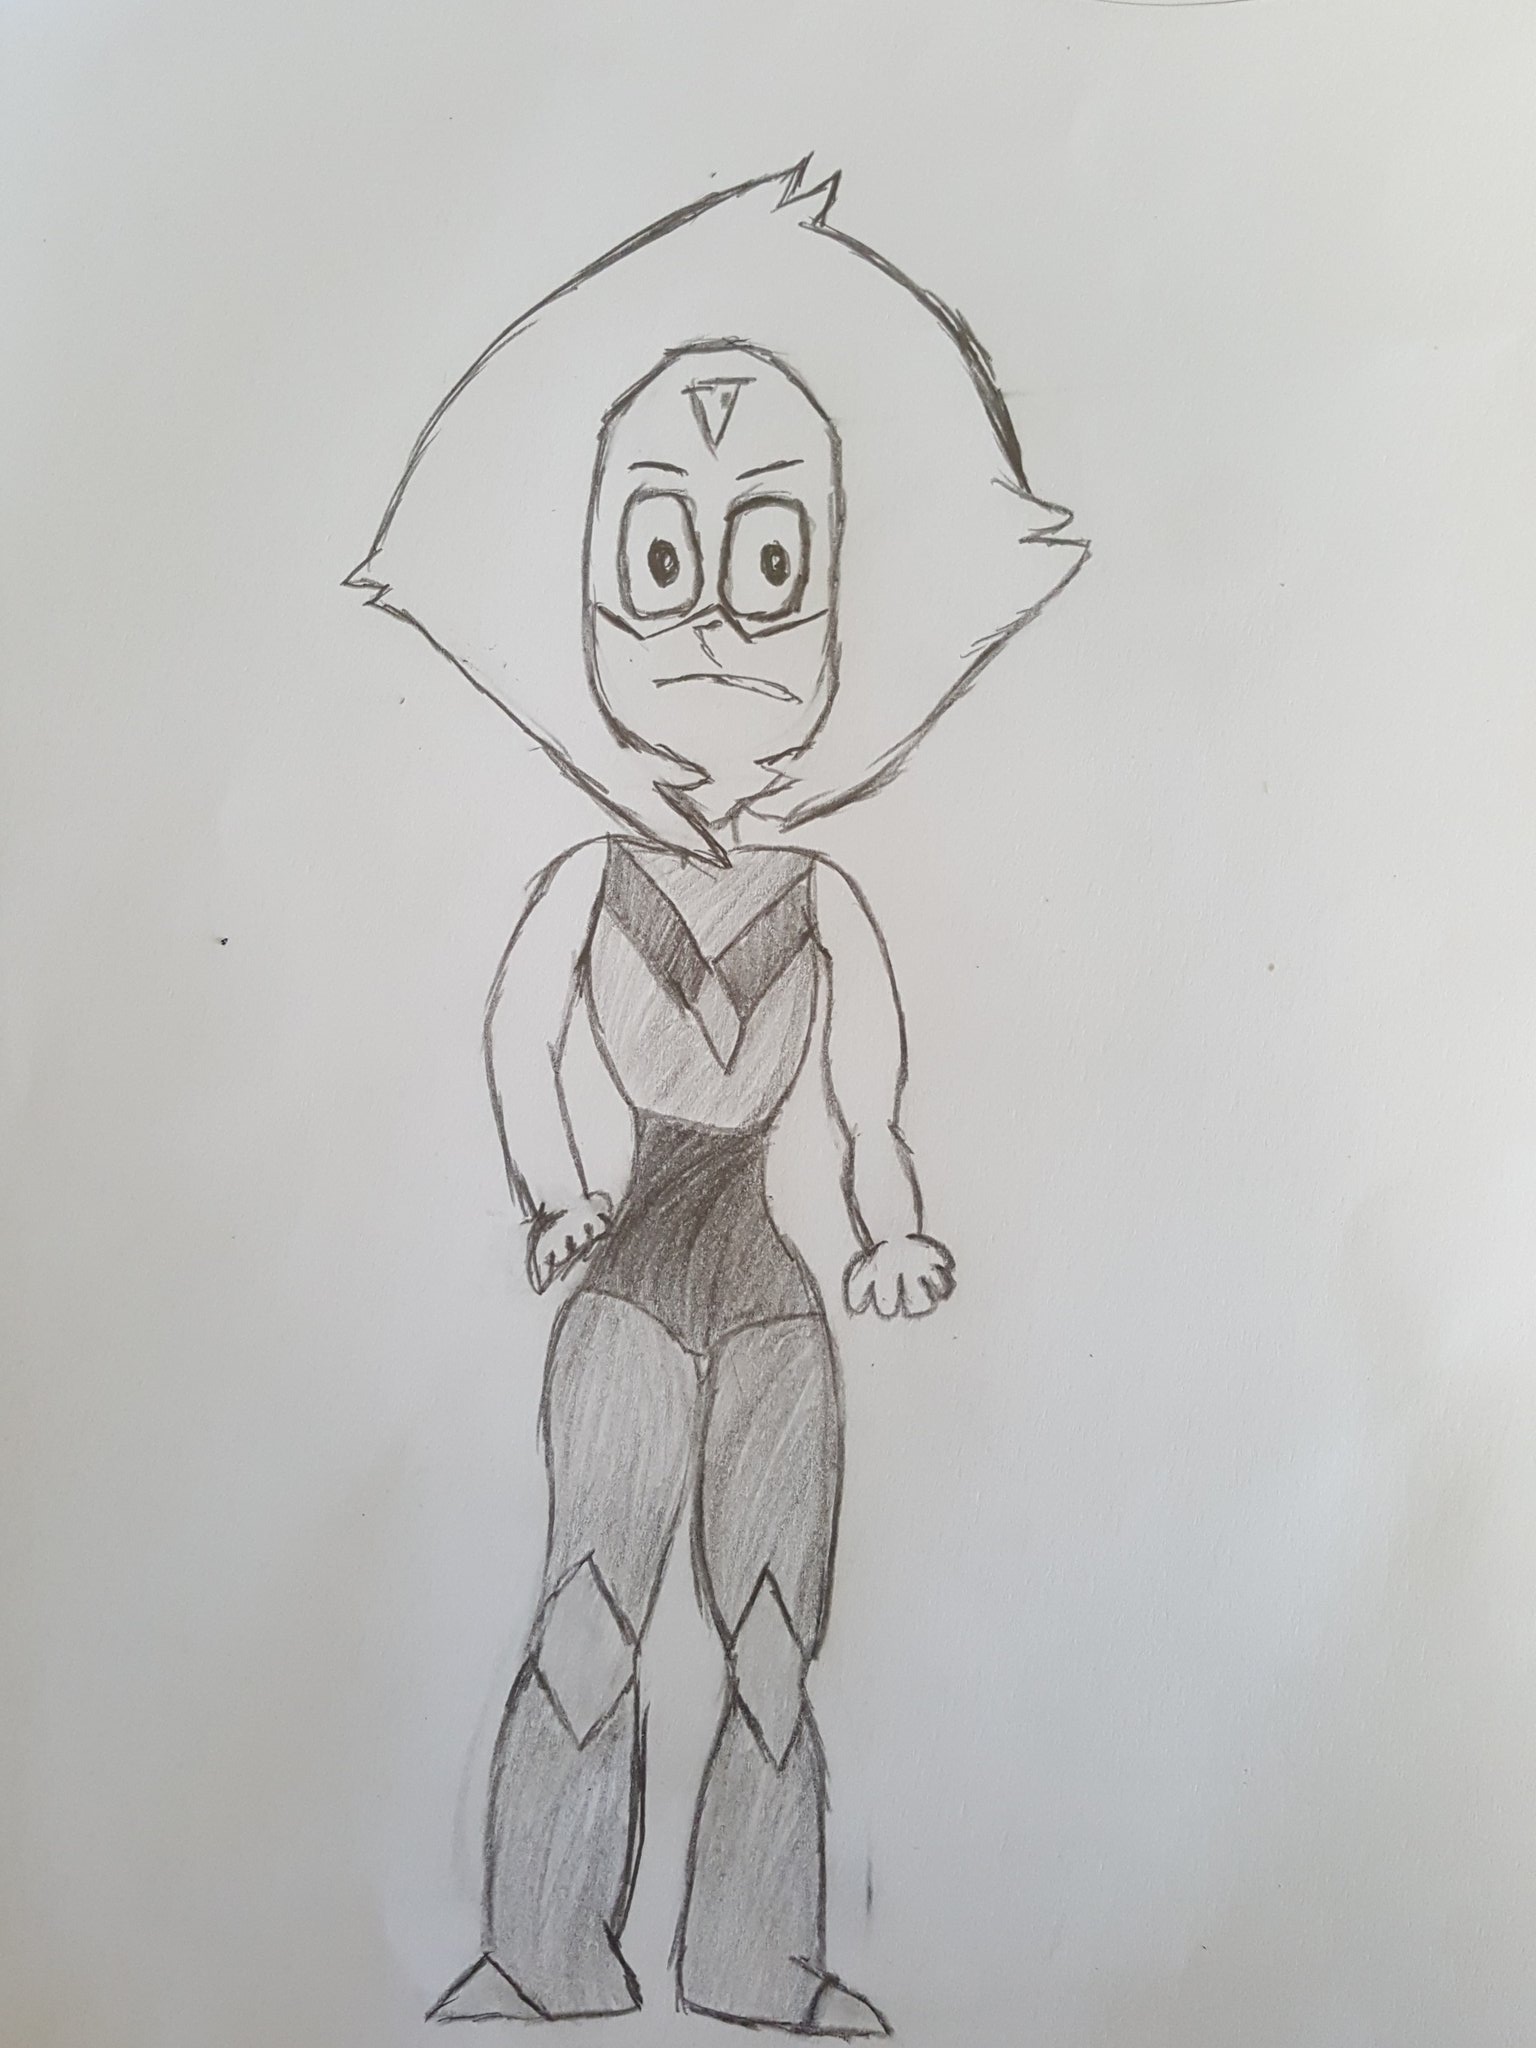 “Alright my first SU fanart ....bleh I remember the days when I hated this show.now I'm reformed, like perry here 😊”